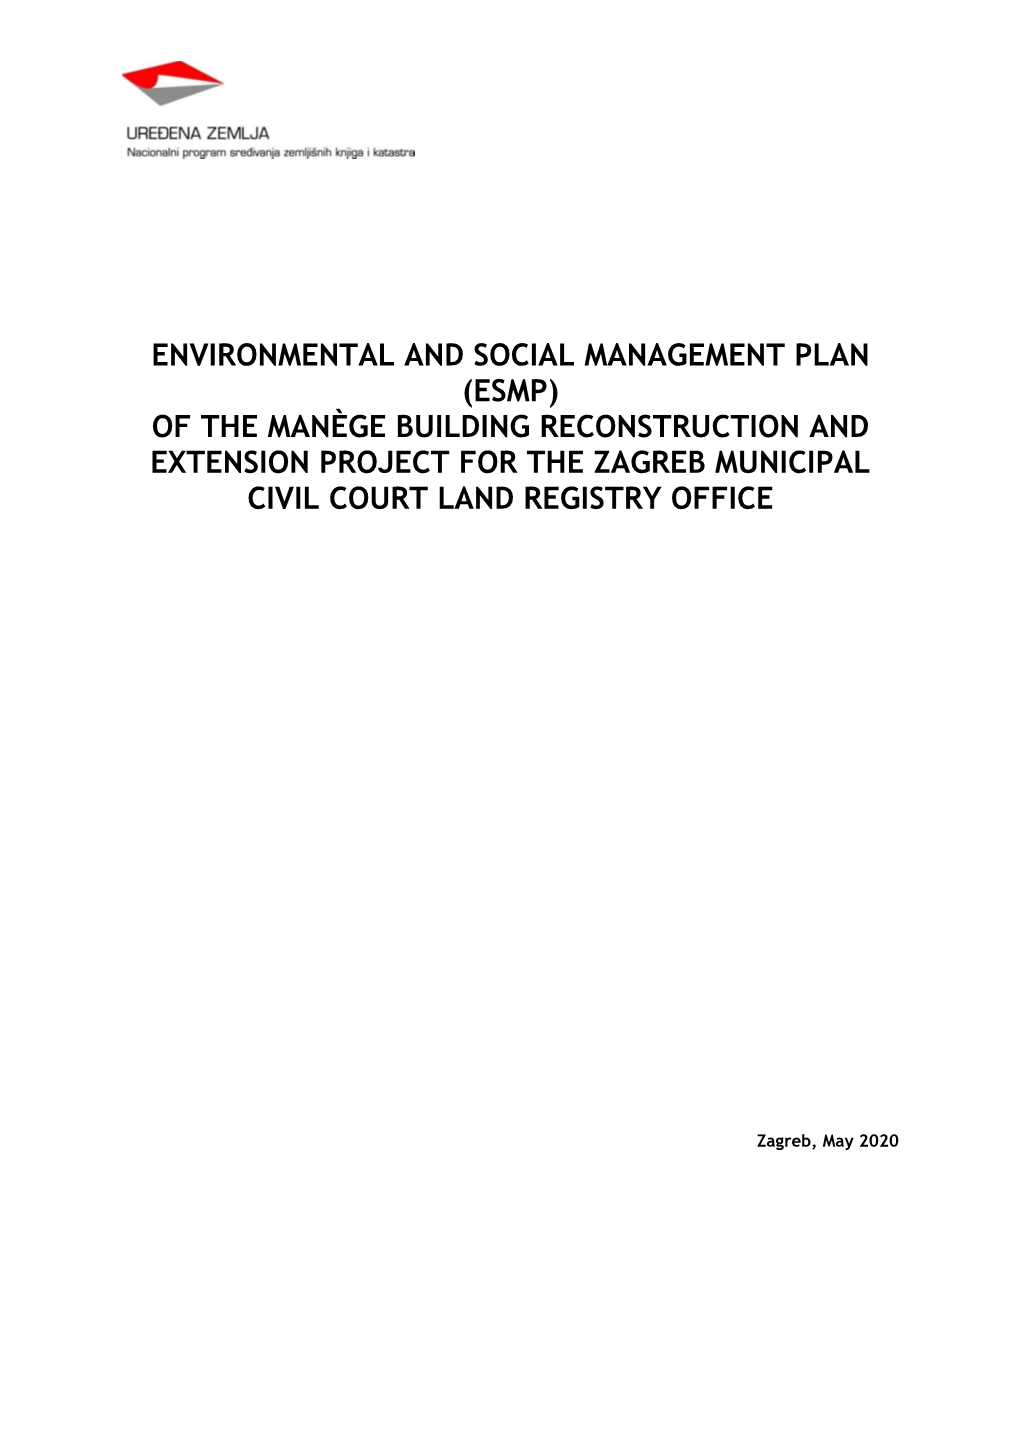 Environmental and Social Management Plan (Esmp) of the Manège Building Reconstruction and Extension Project for the Zagreb Municipal Civil Court Land Registry Office